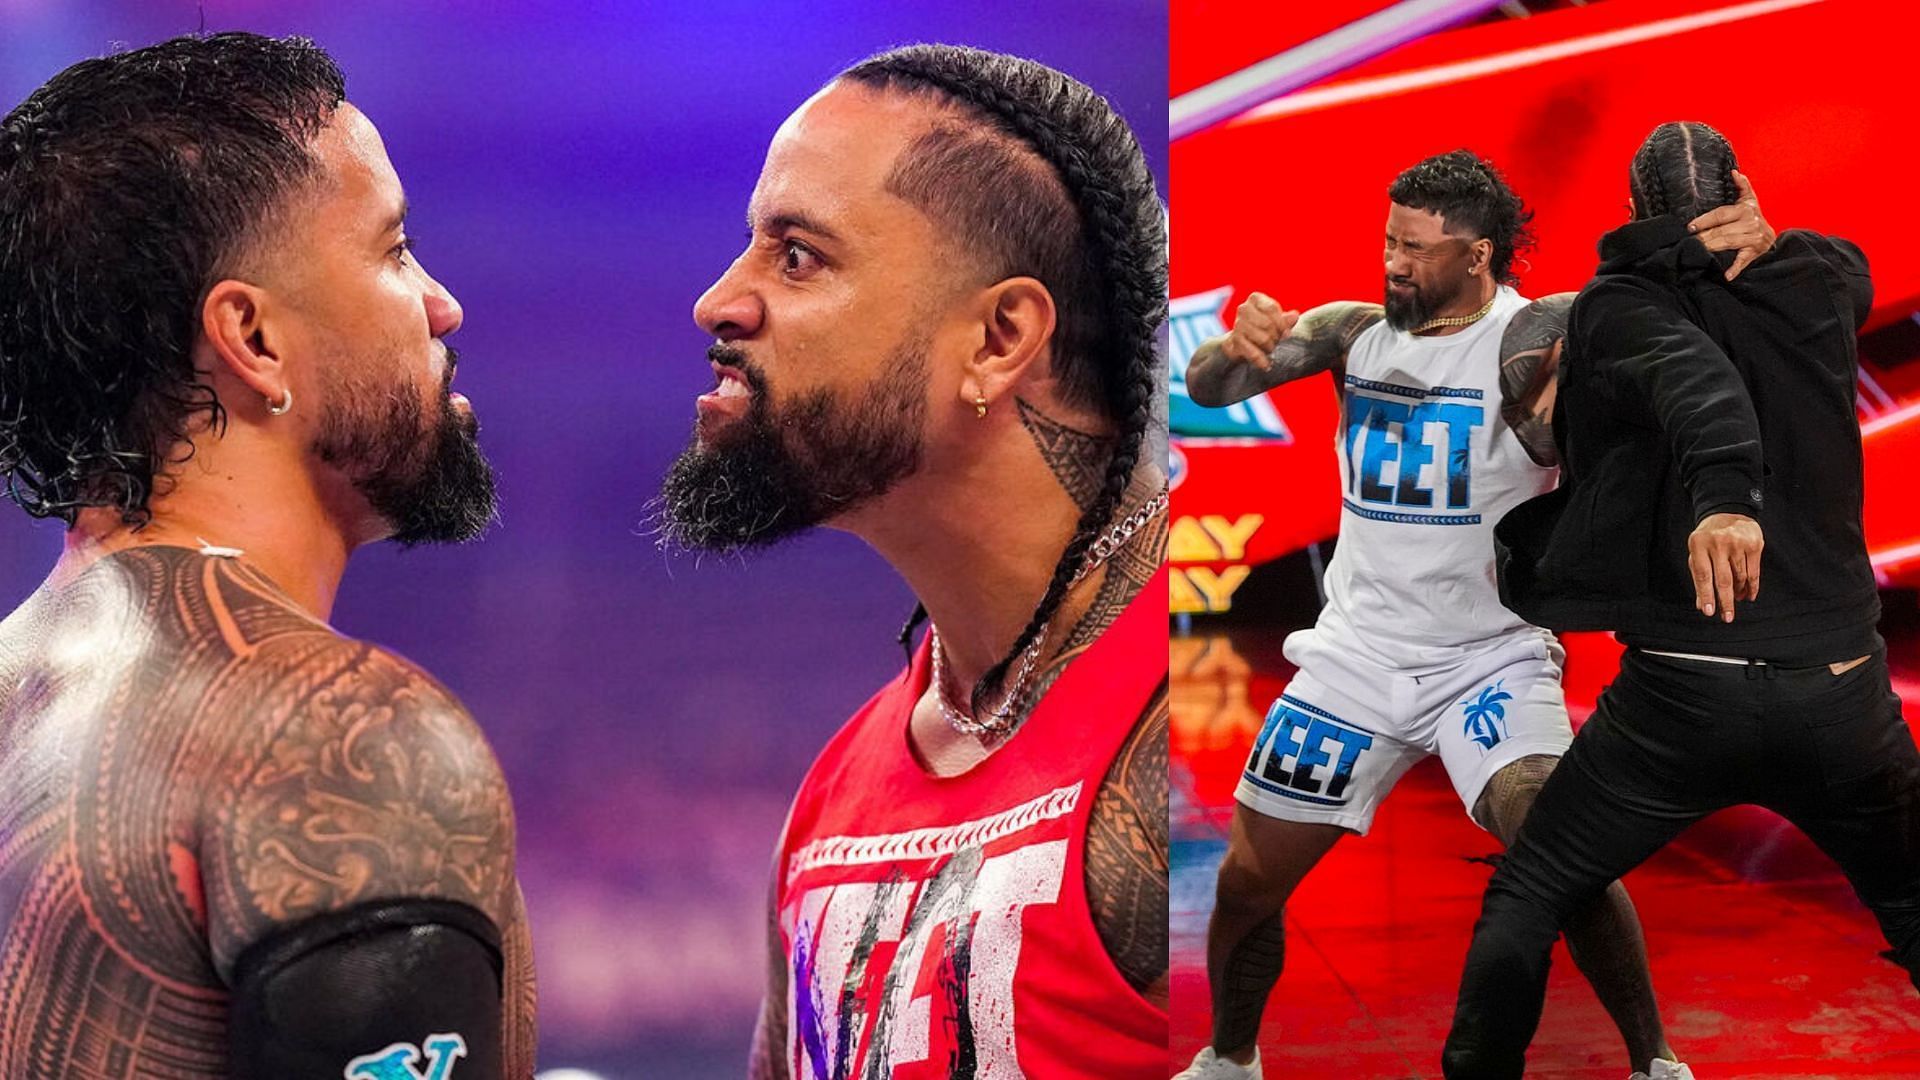 Jey Uso and Jimmy Uso are former multi-time WWE Tag Team Champions